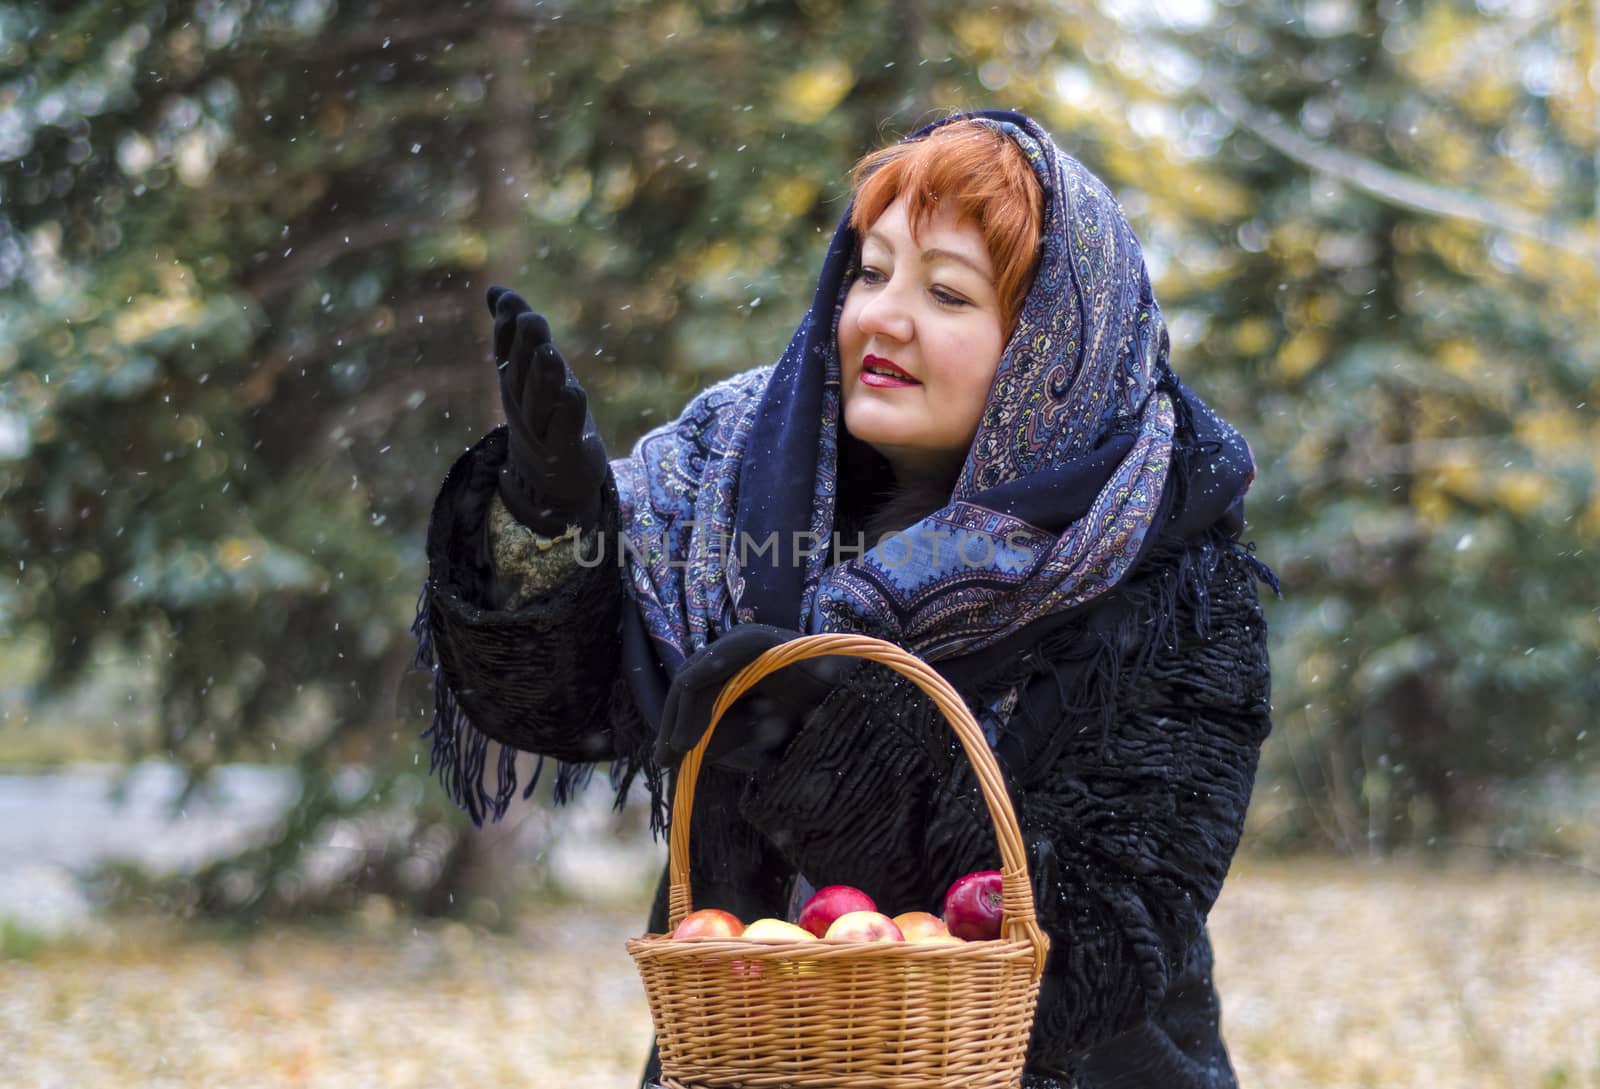 Woman with basket of apples in the forest, comes the first snow by Gaina